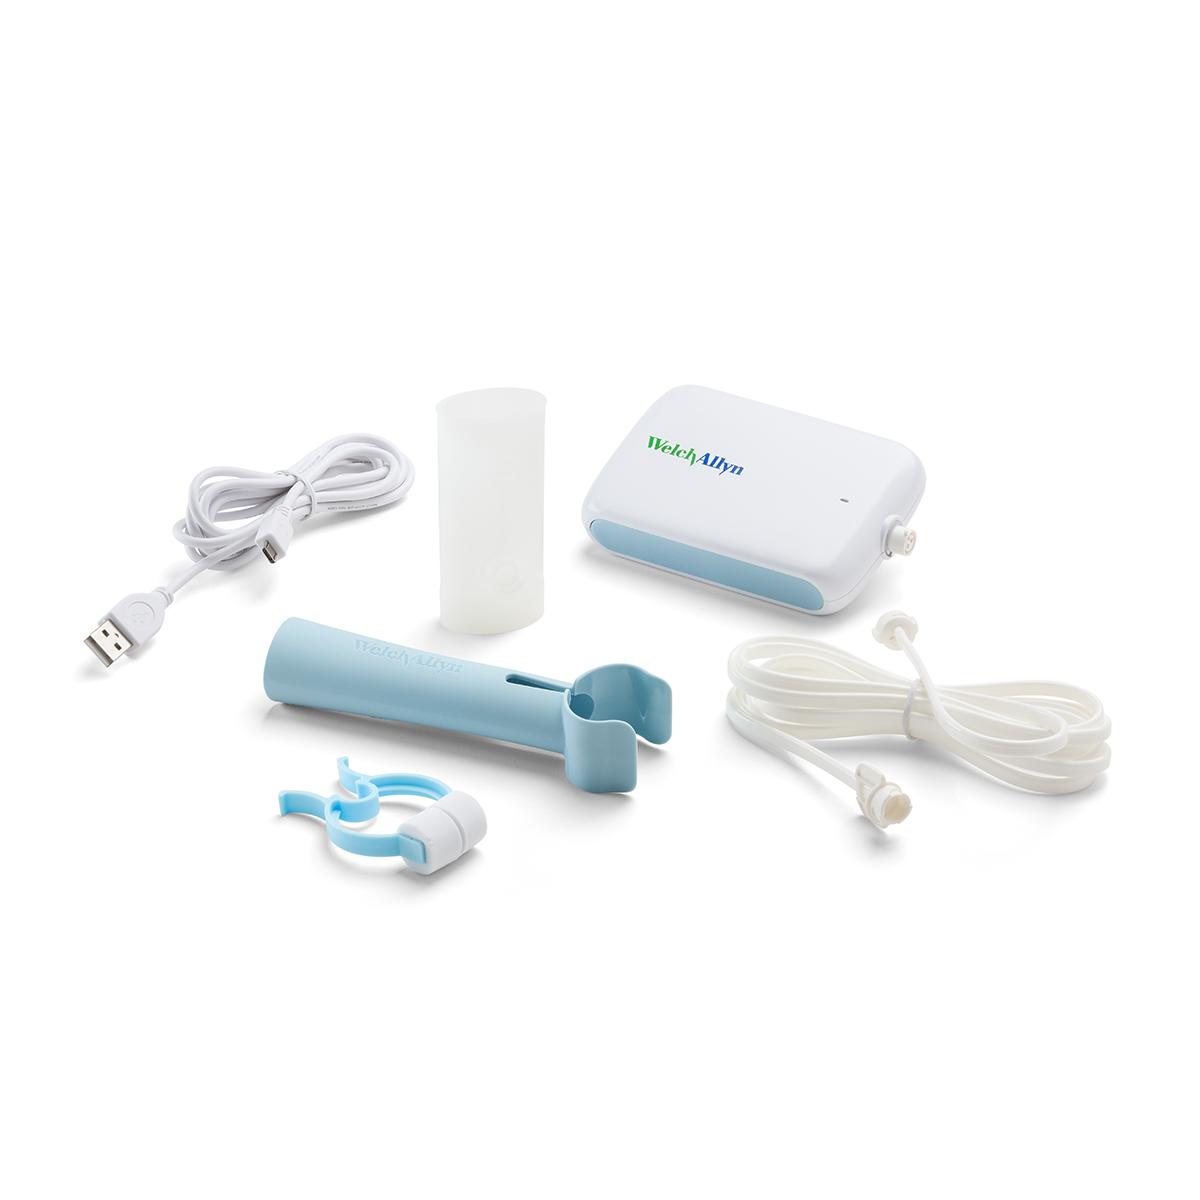 Welch Allyn Diagnostic Cardiology Suite spirometer is shown with all accessories separated.